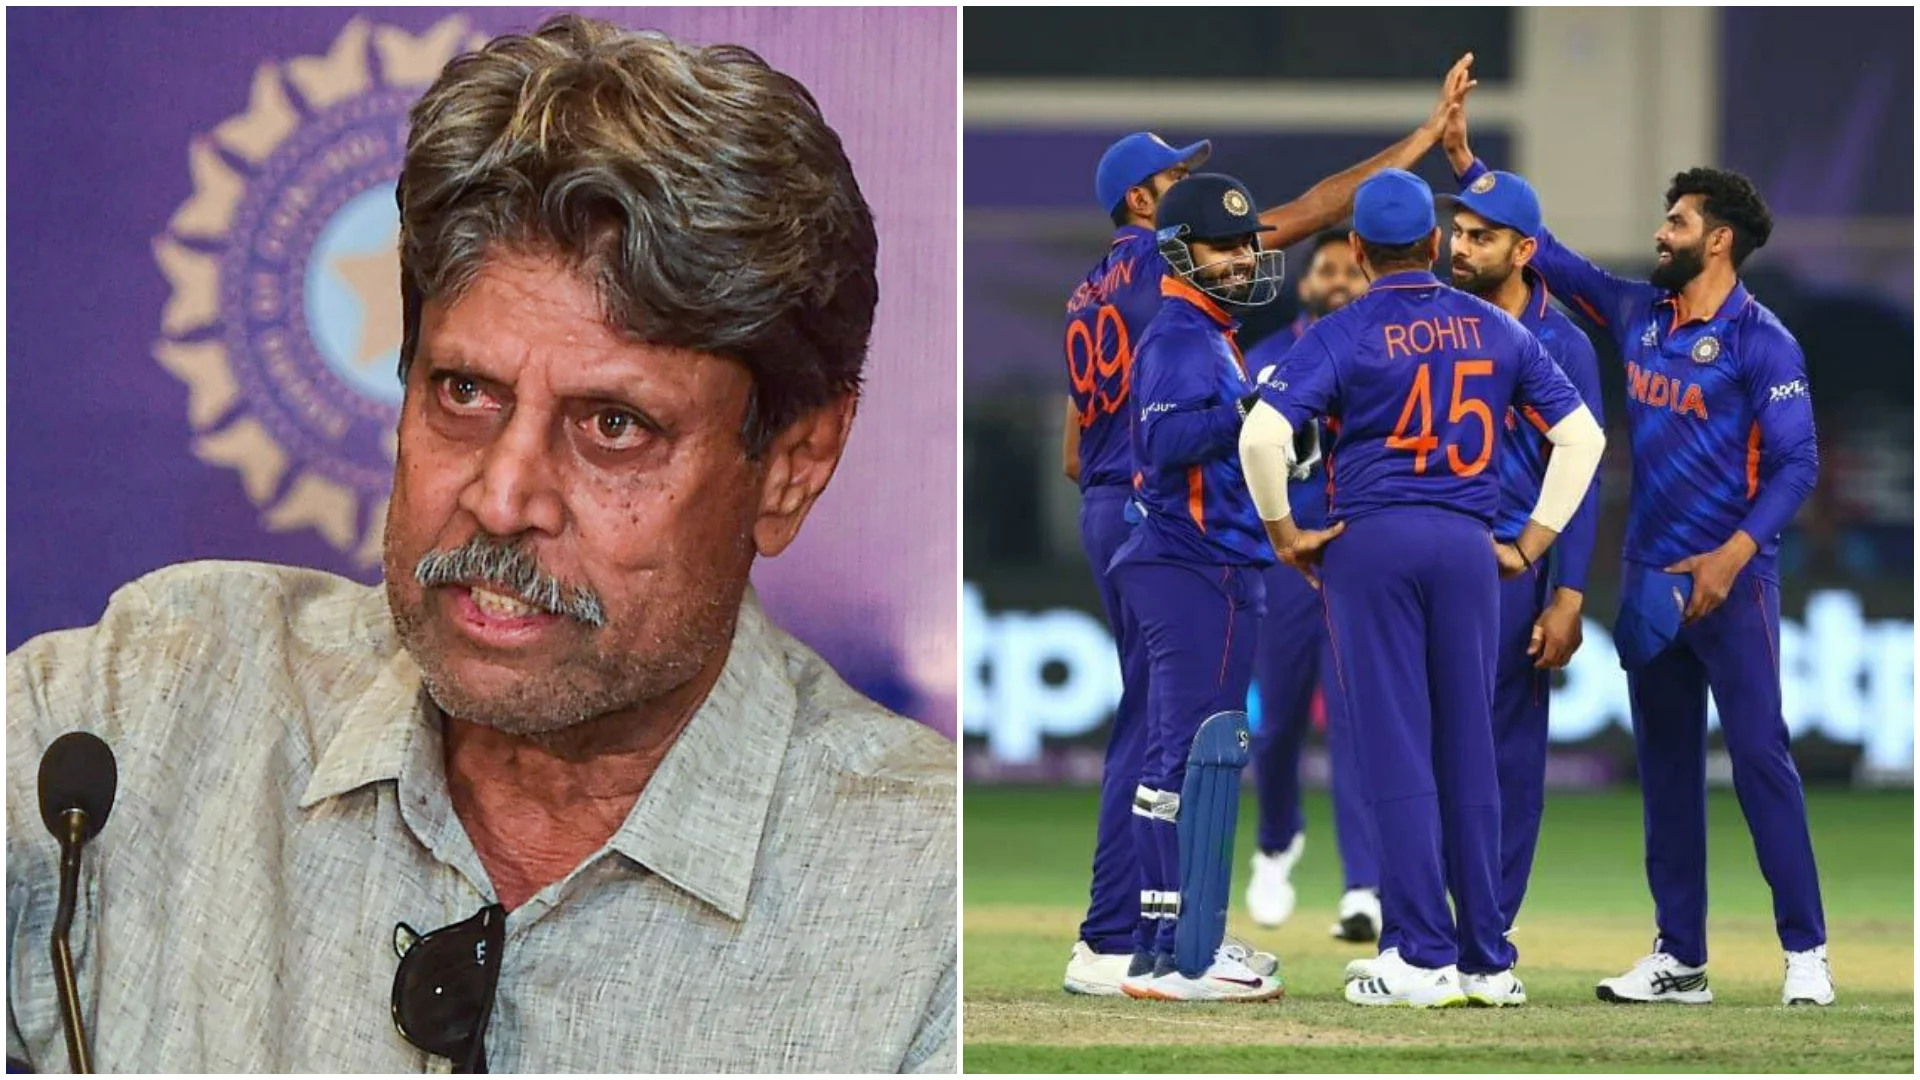 Former Indian captain Kapil Dev defines the Indian team as the ‘NEW CHOKERS’ of World Cricket